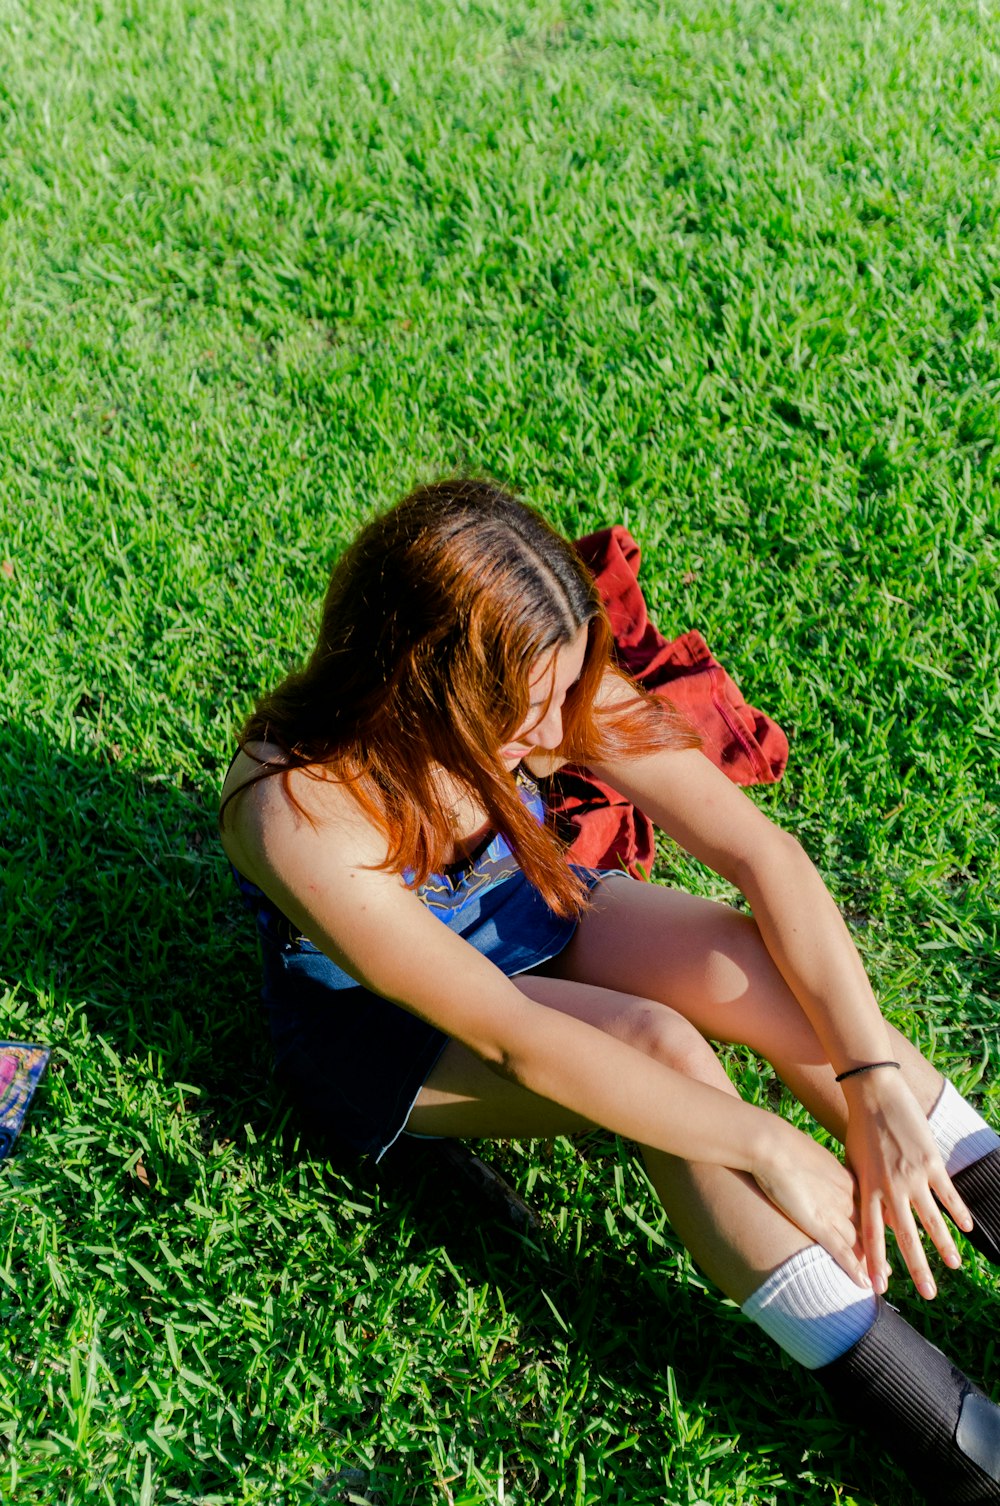 a woman sitting on the grass with her legs crossed